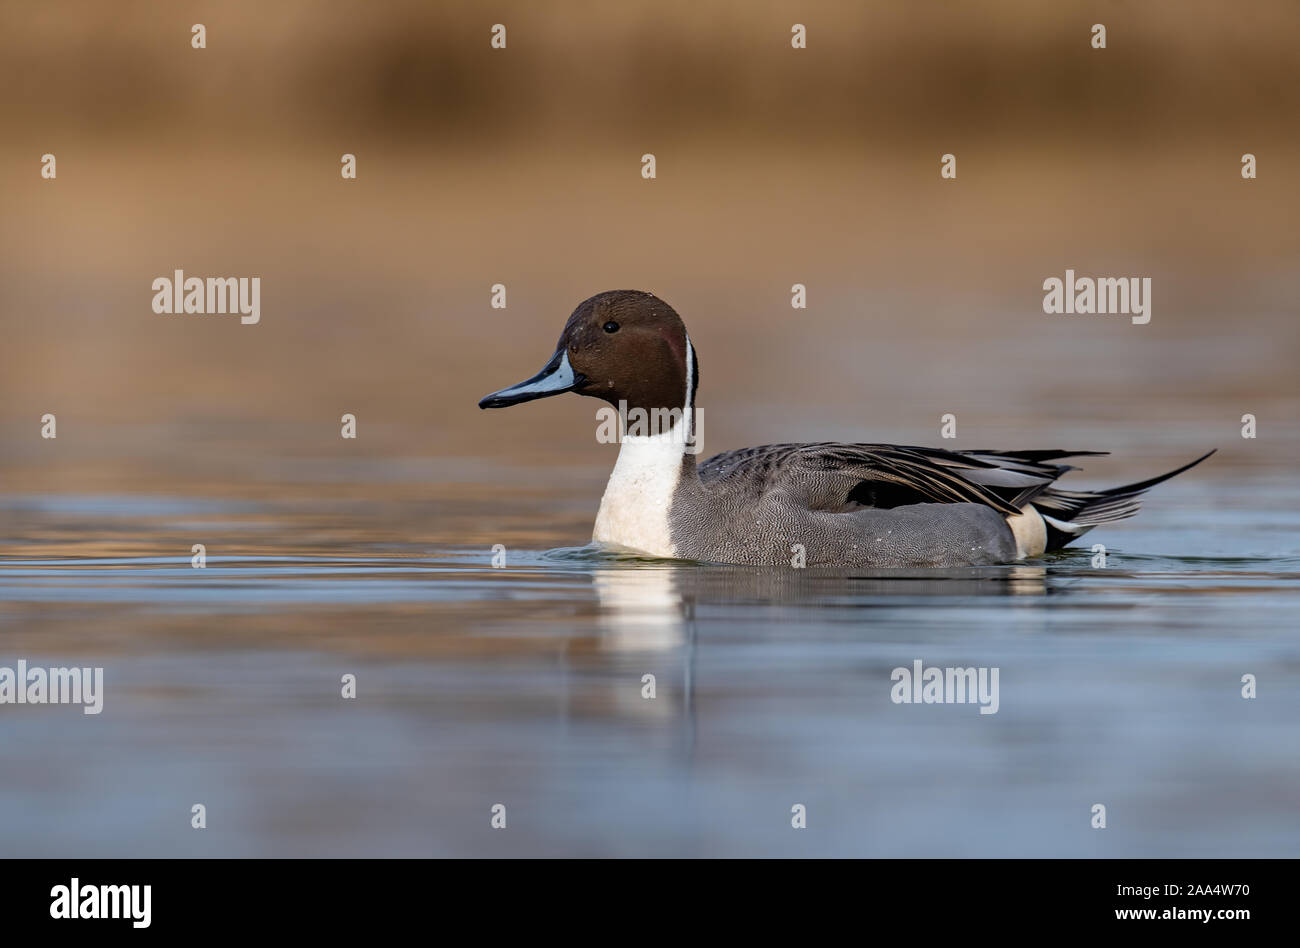 A duck in Canada in Autumn Stock Photo